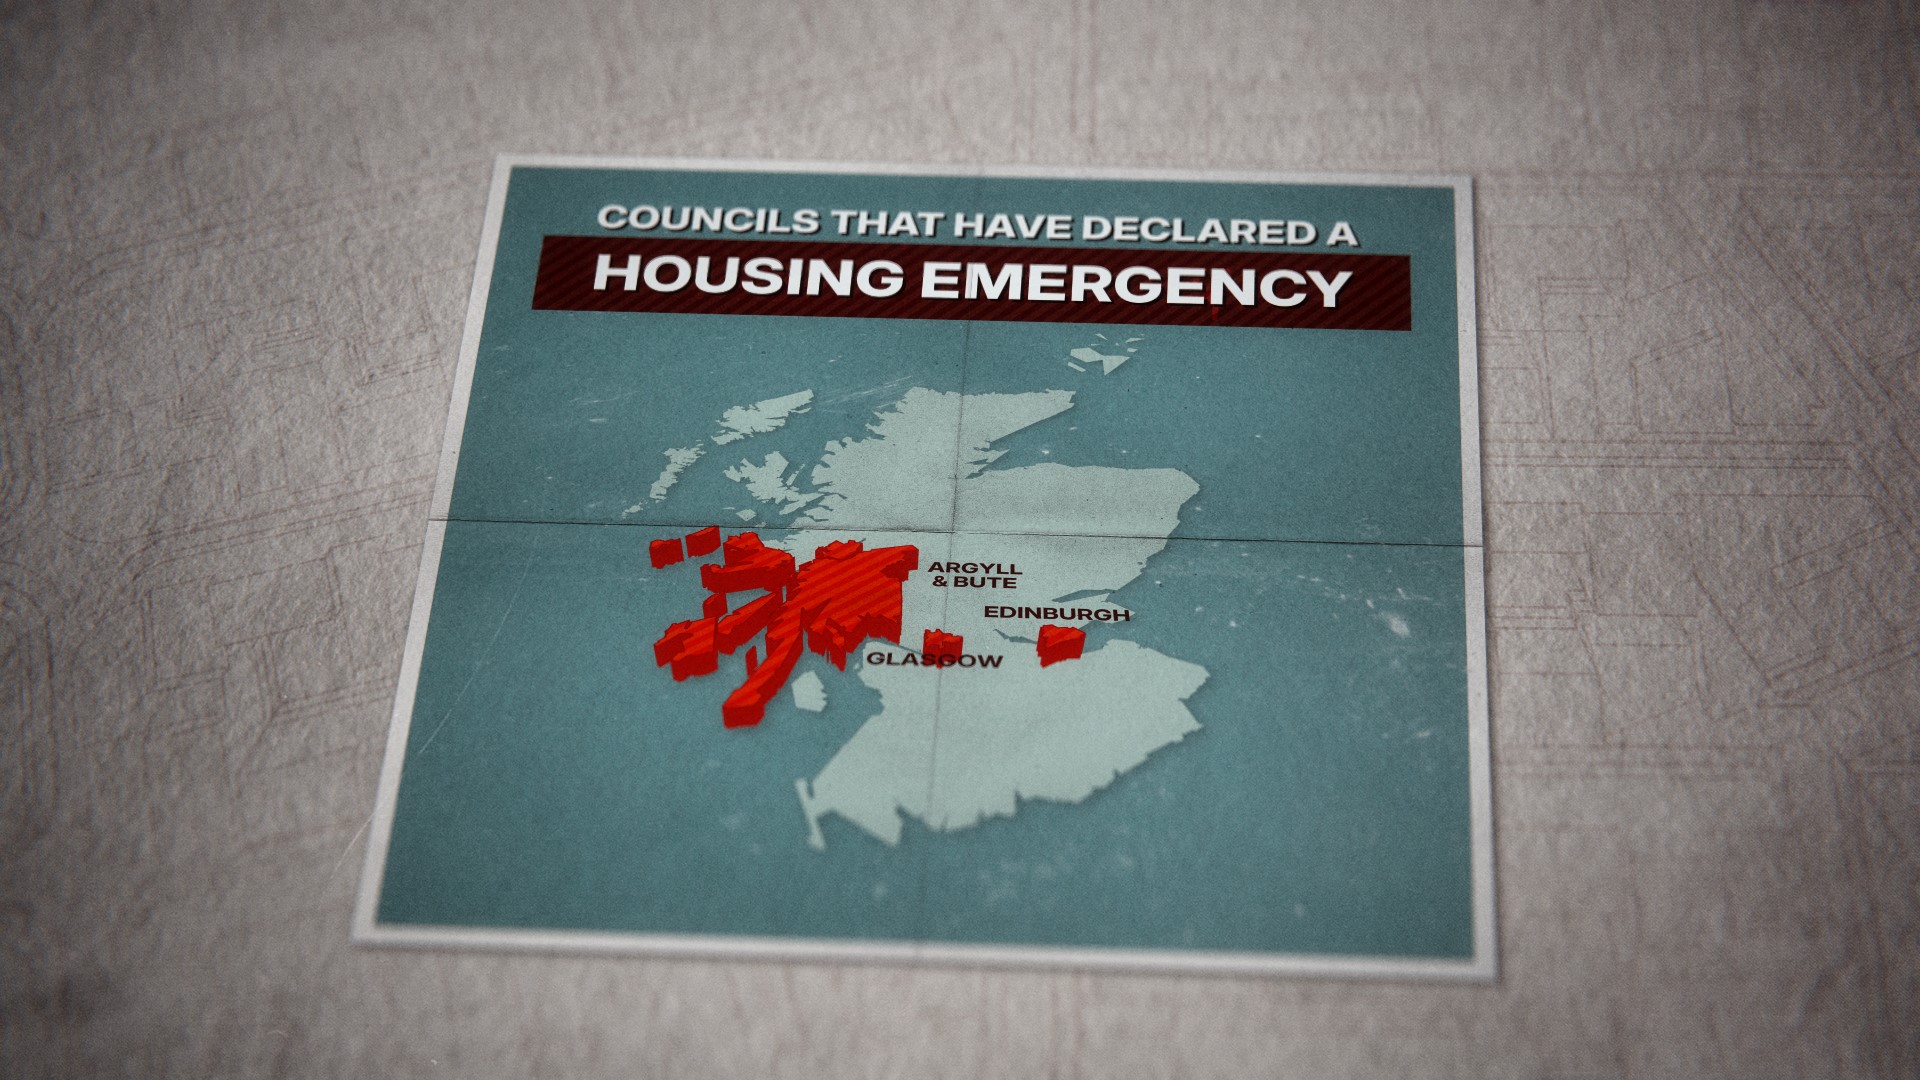 Councils that have declared a housing emergency.